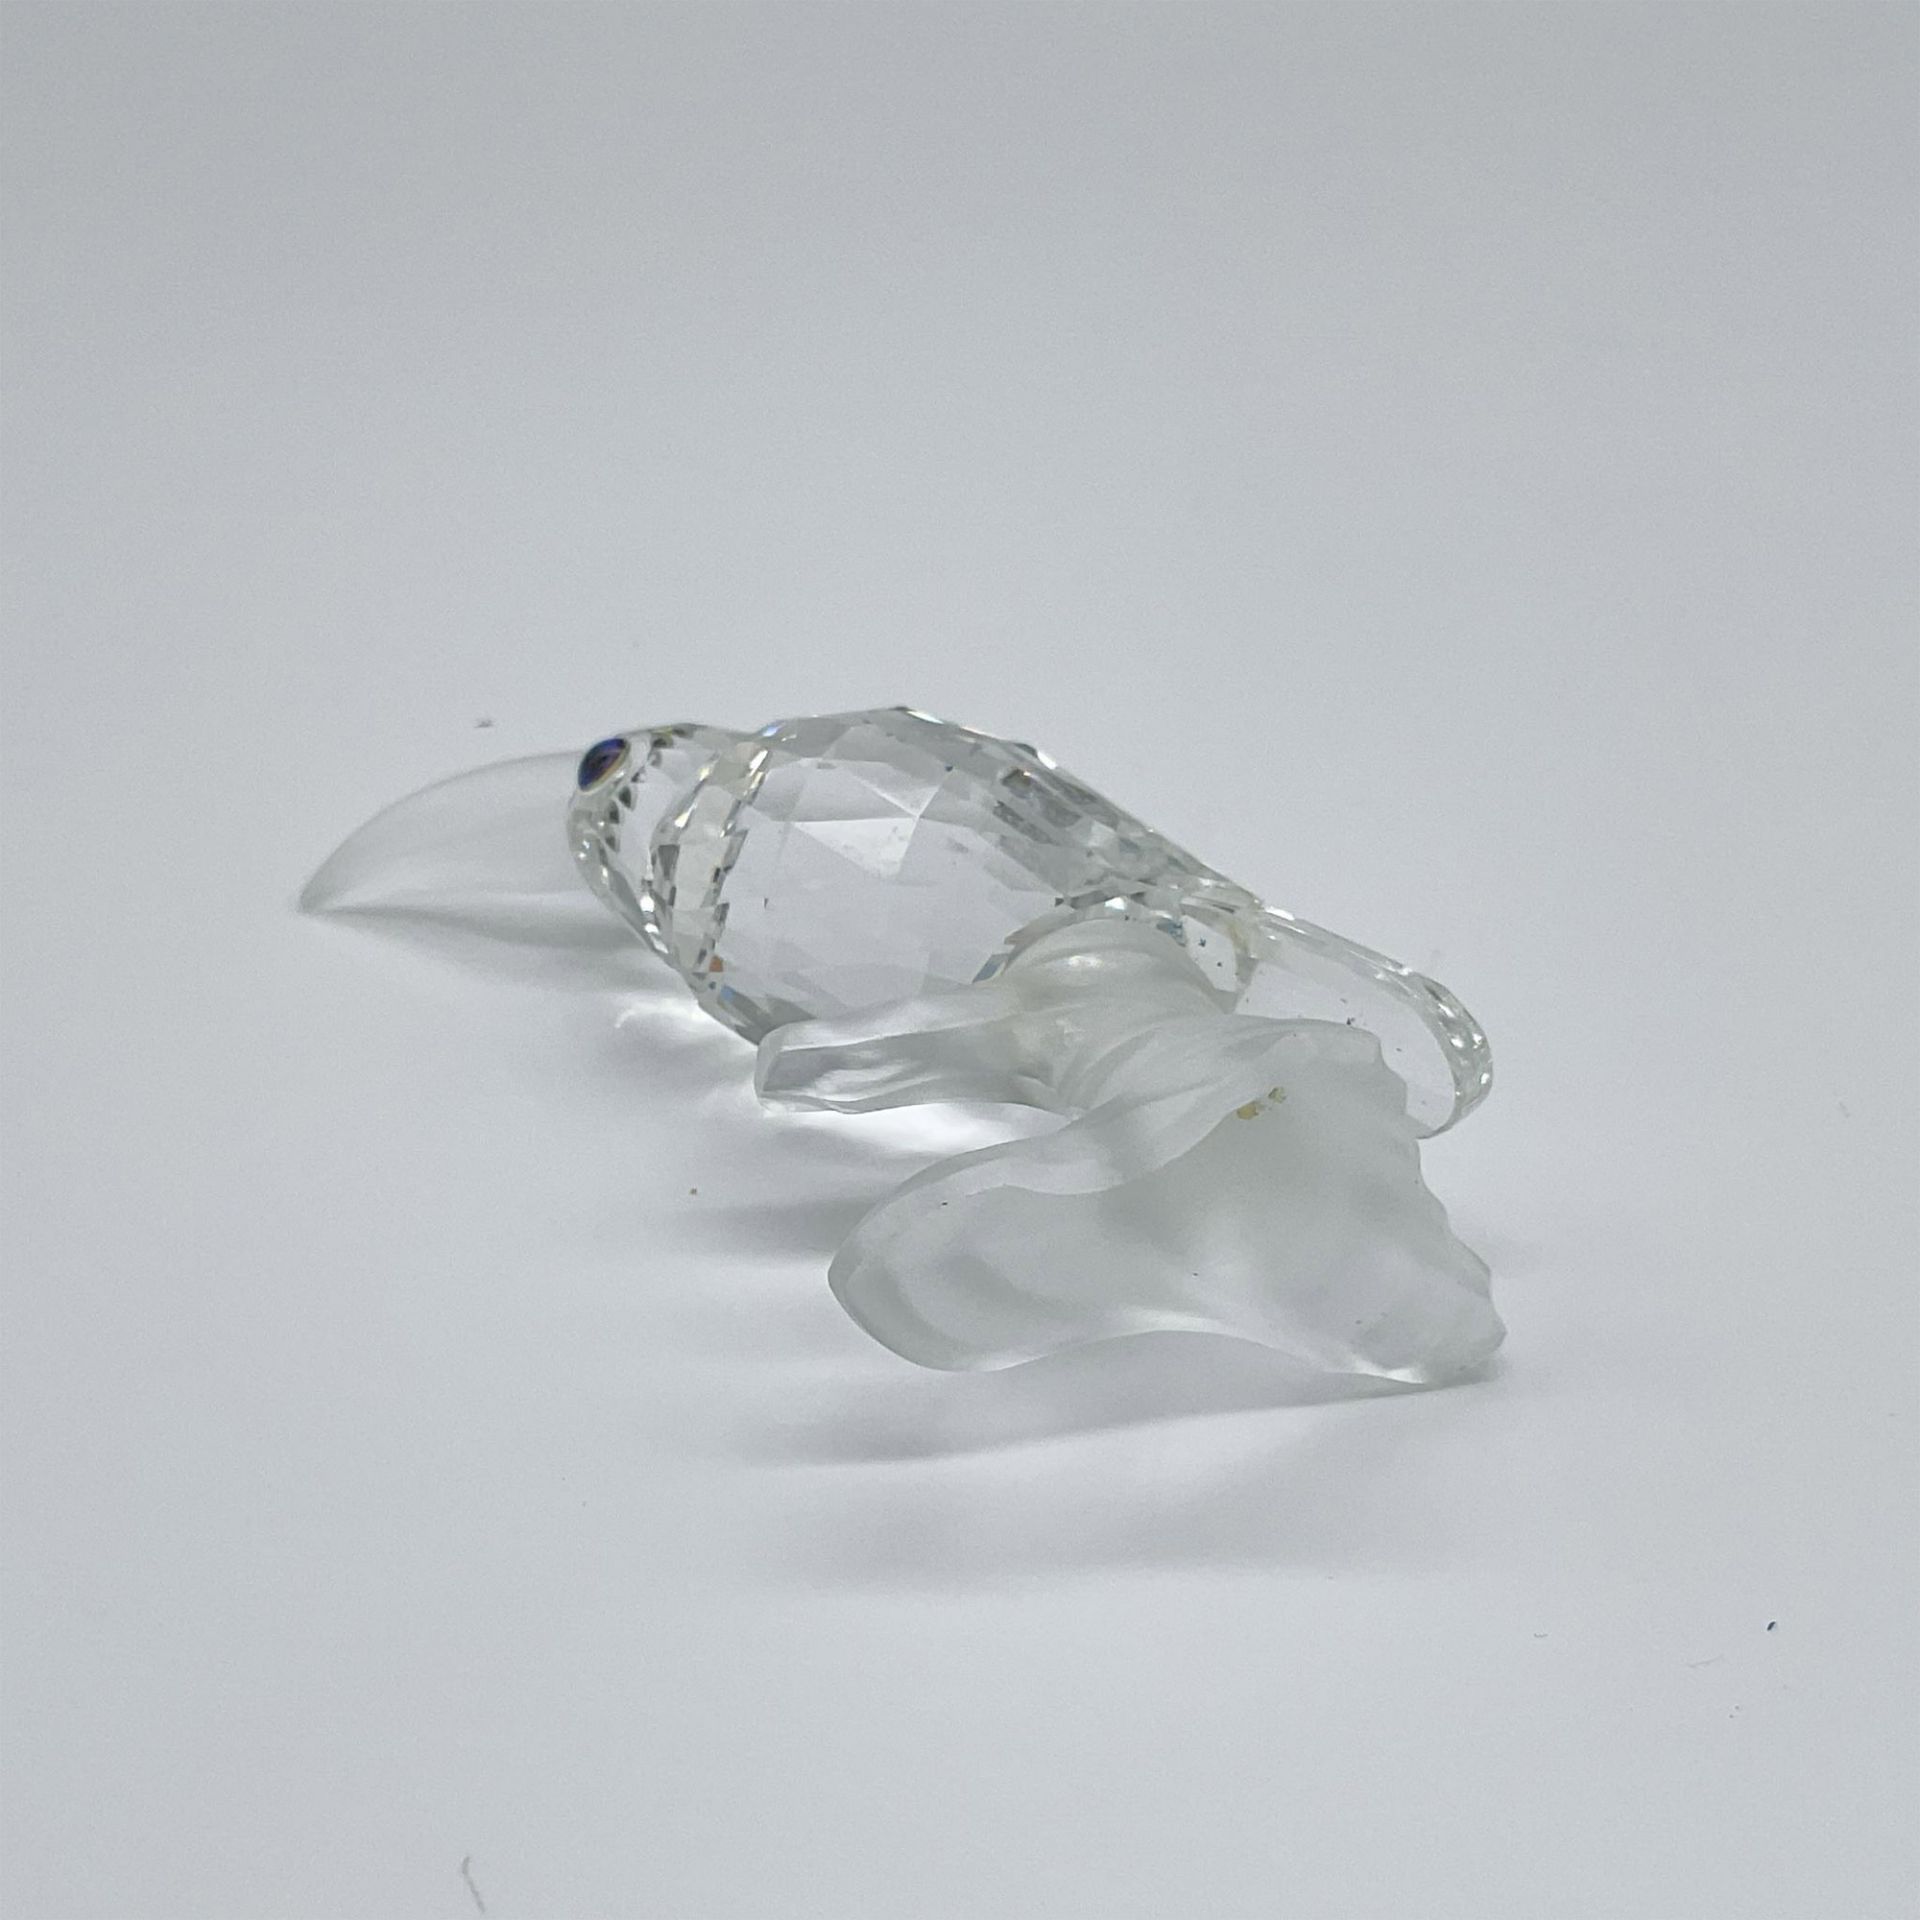 Swarovski Silver Crystal Figurine, Toucan Up in the Trees - Image 3 of 4